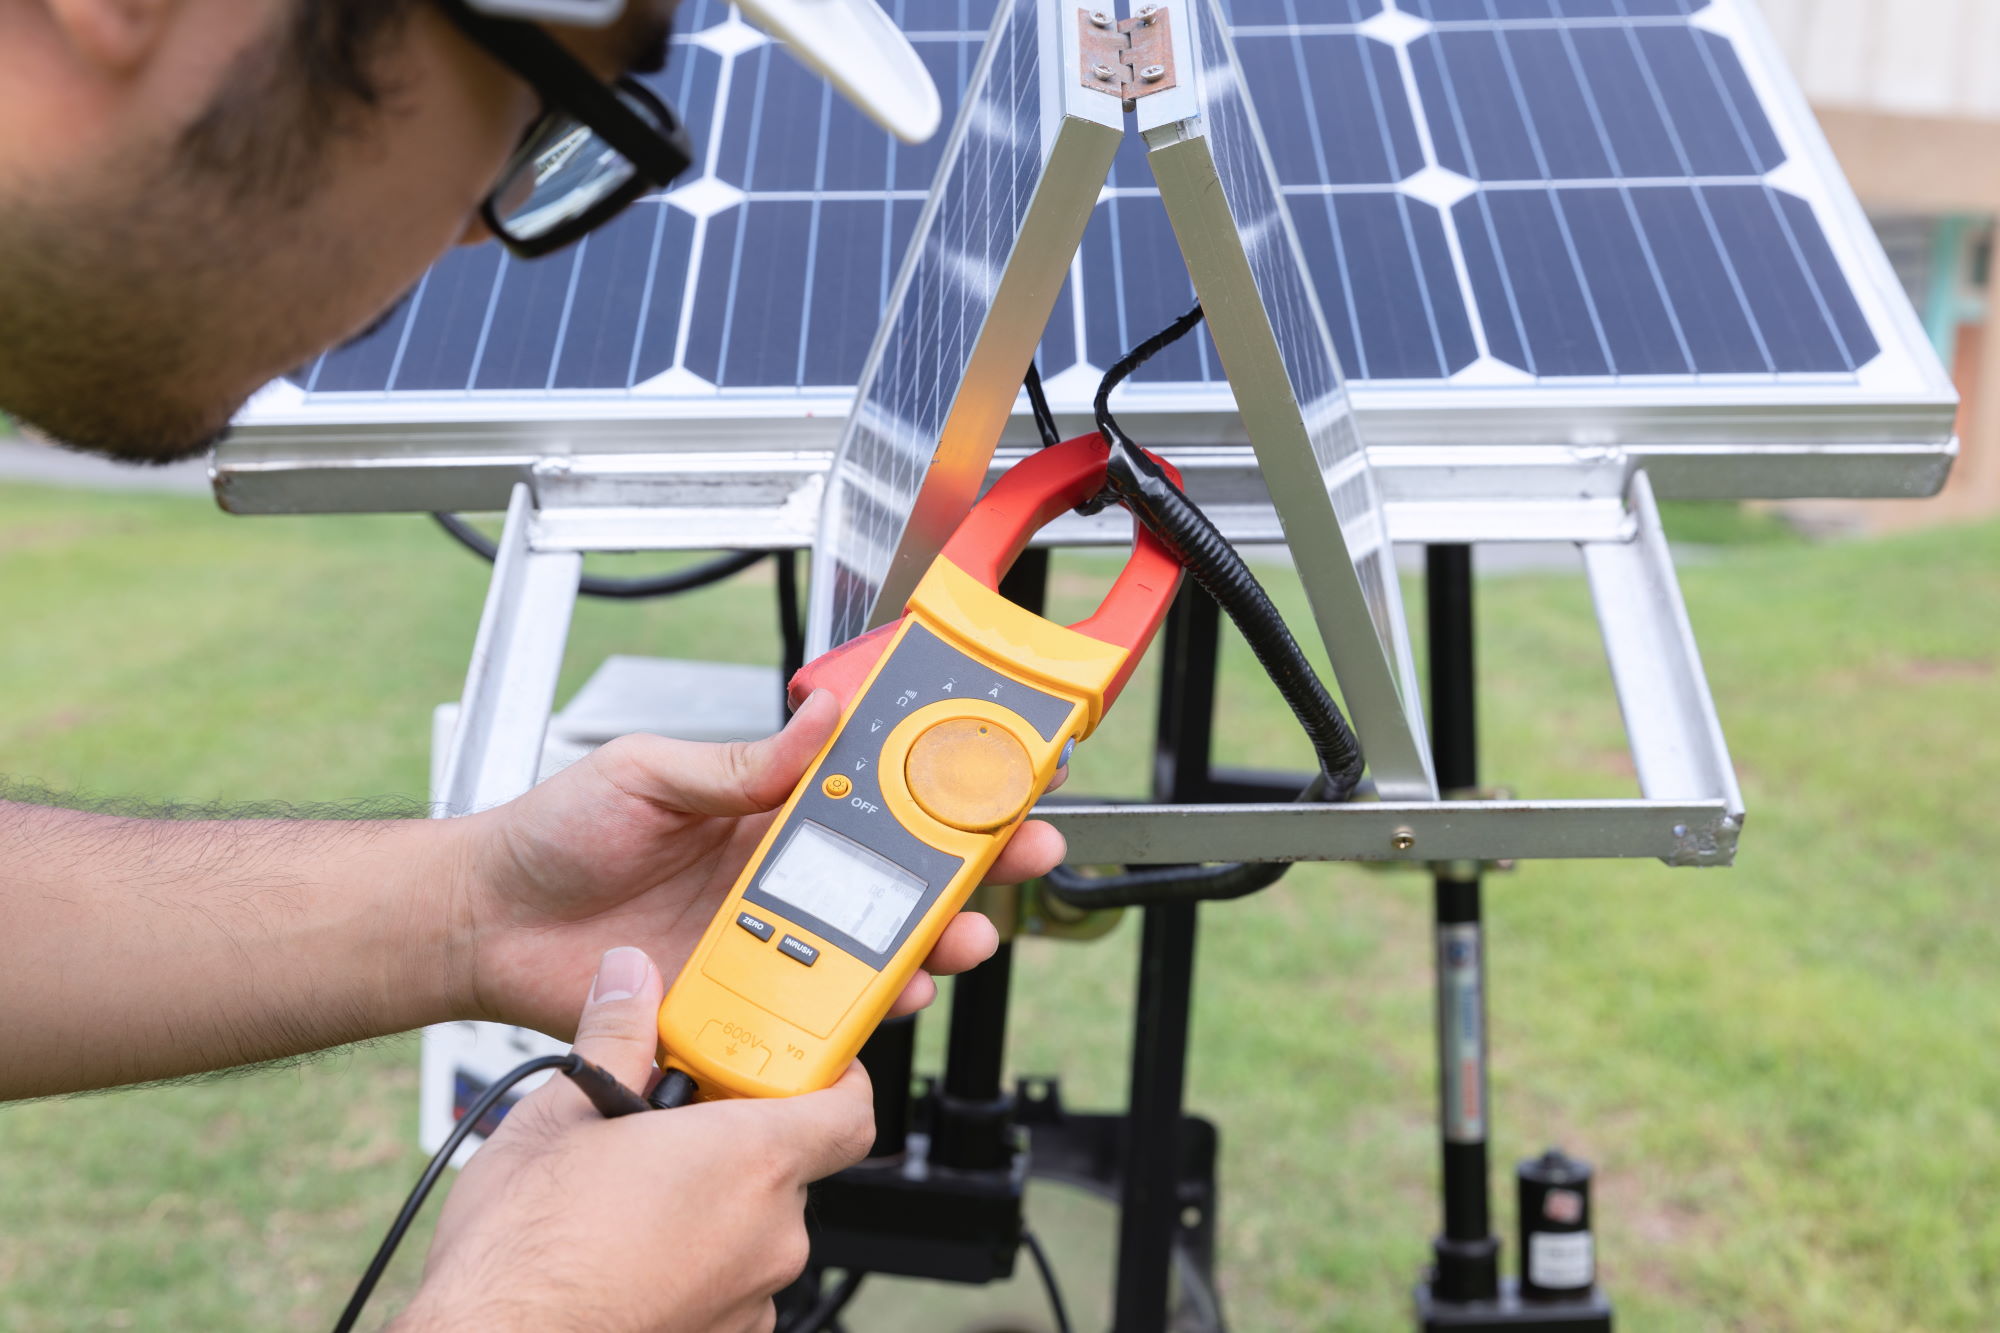 Engineer solar photovoltaic panels station checks with measurement tool.